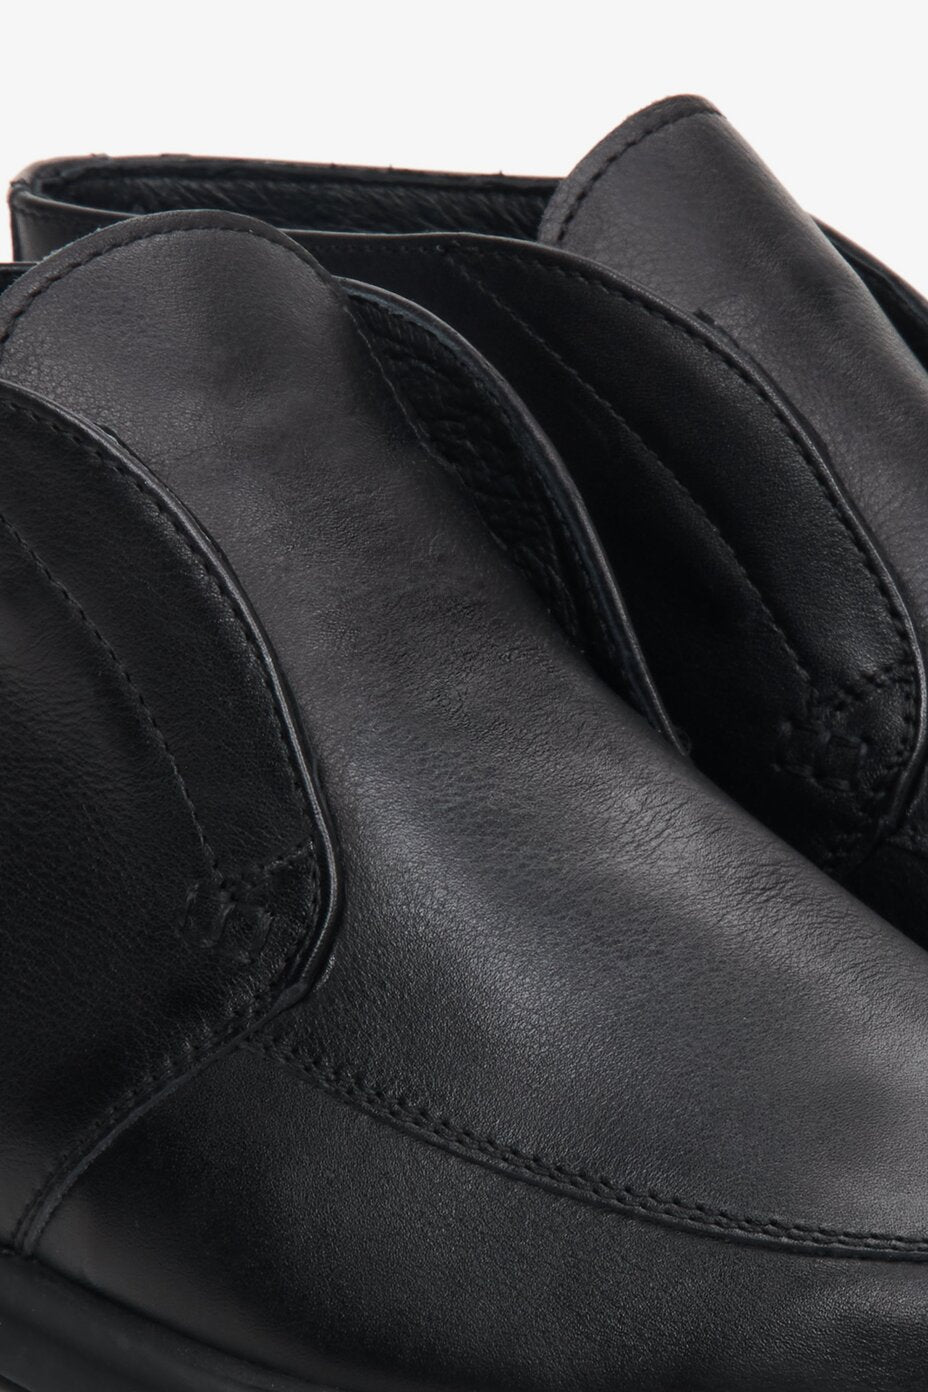 Estro men's leather slip-on shoes in black with visible stitching.